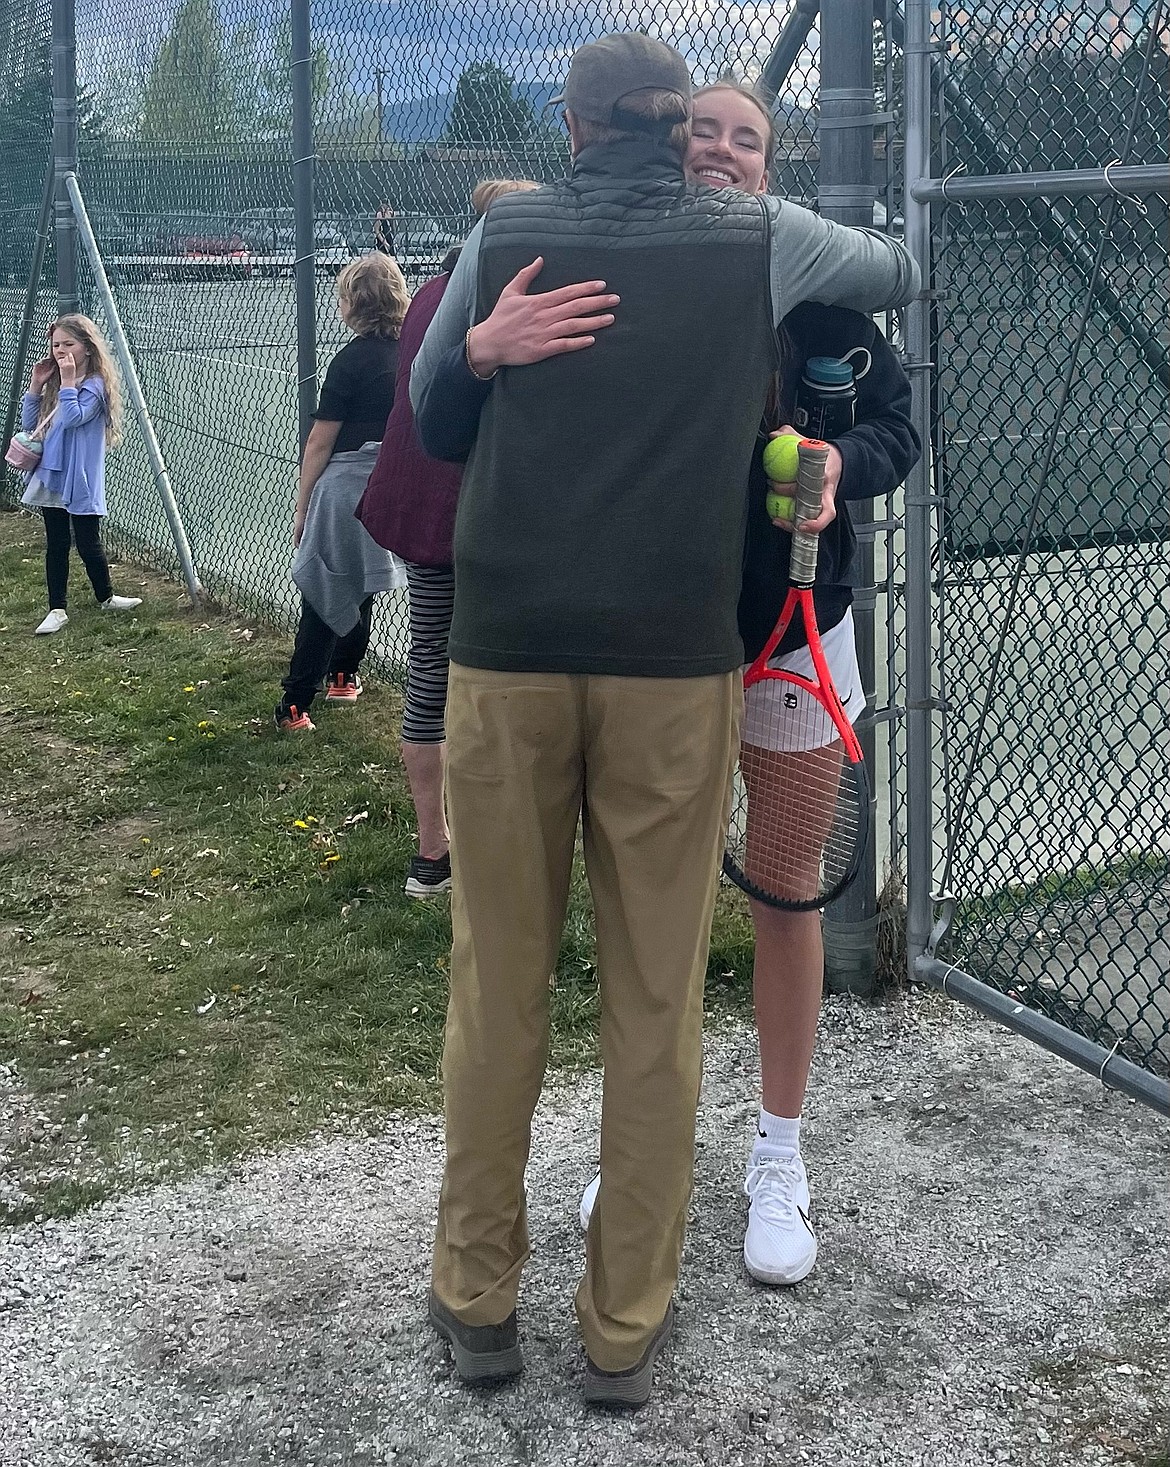 Sandpoint senior Neva Reseka gets a victory hug from her father, David Reseska, after a big win against Moscow on Thursday.